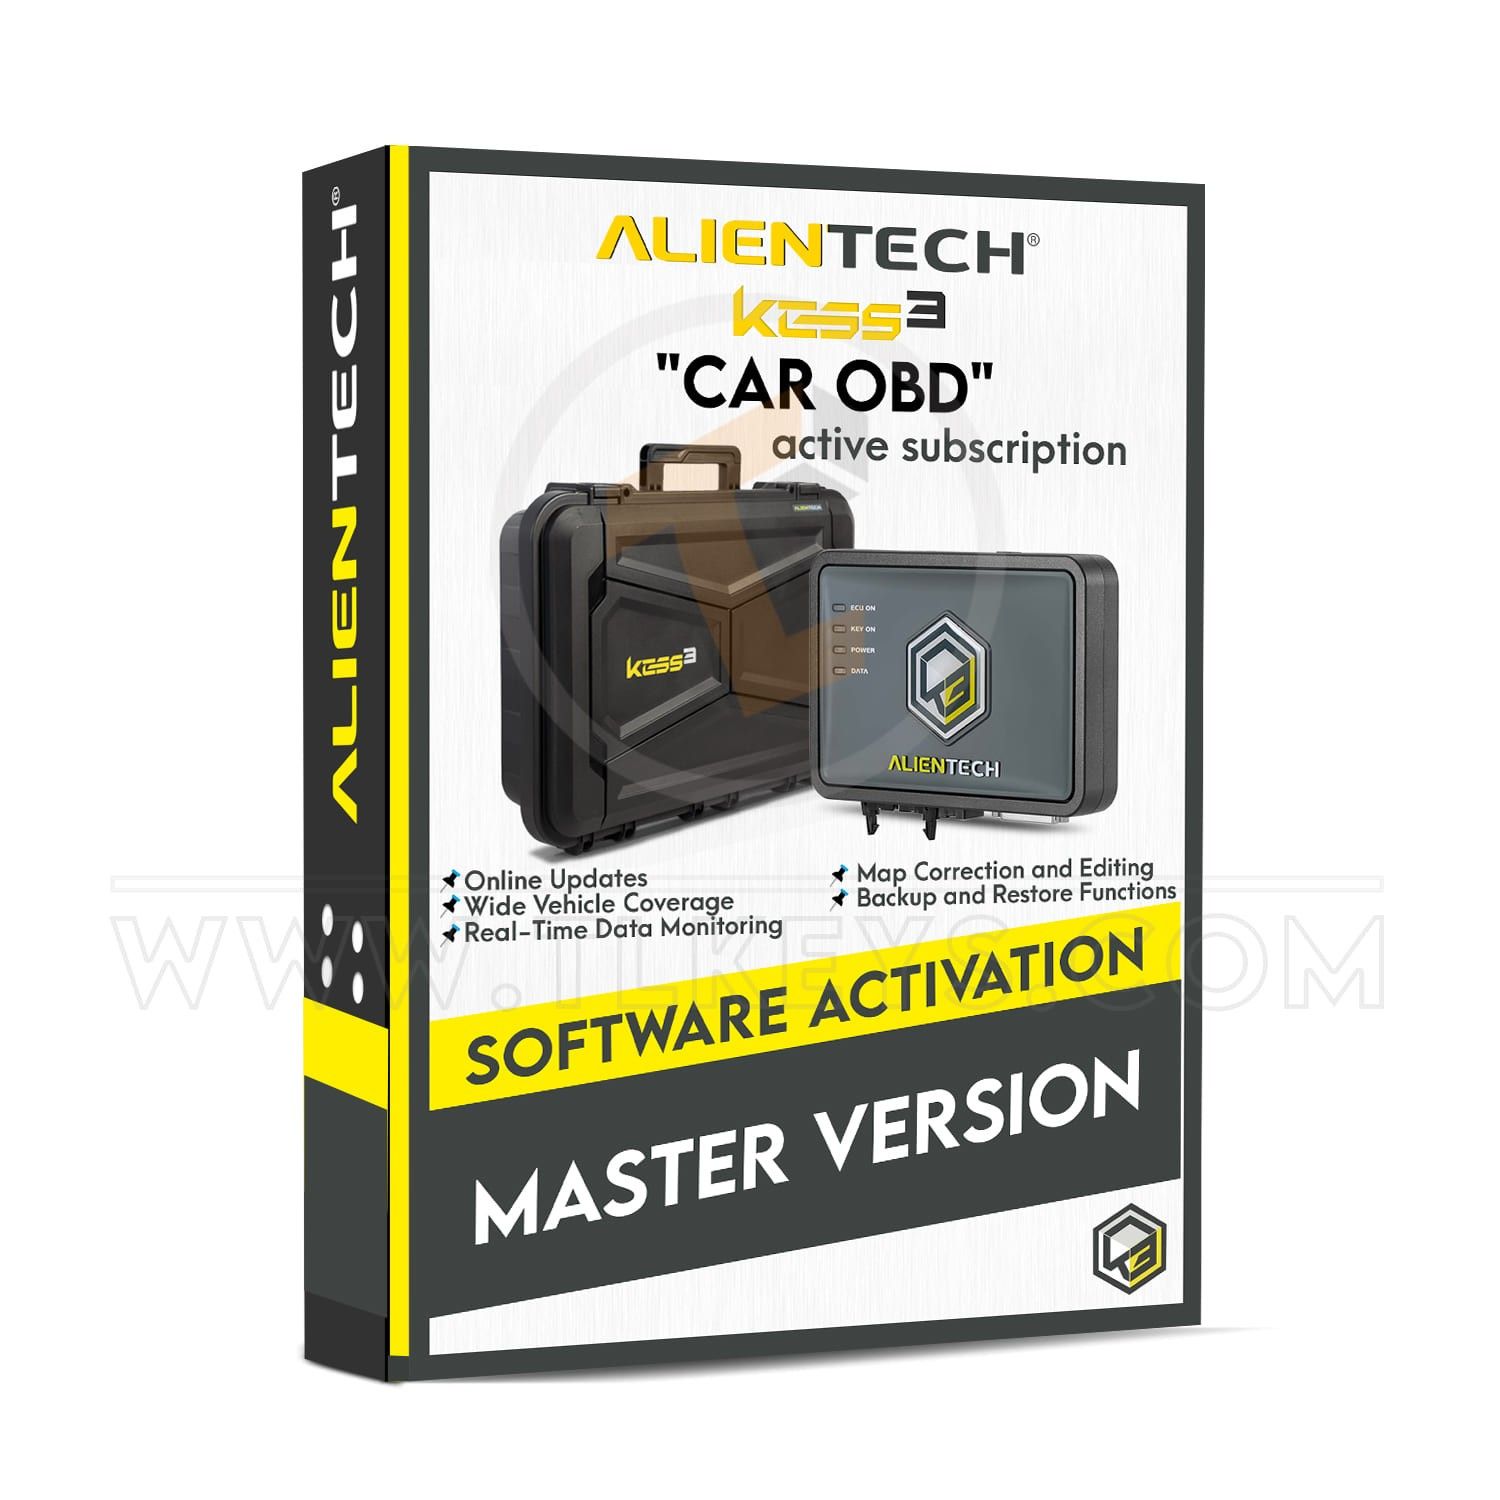 Alientech Master version "CAR OBD" and active subs software